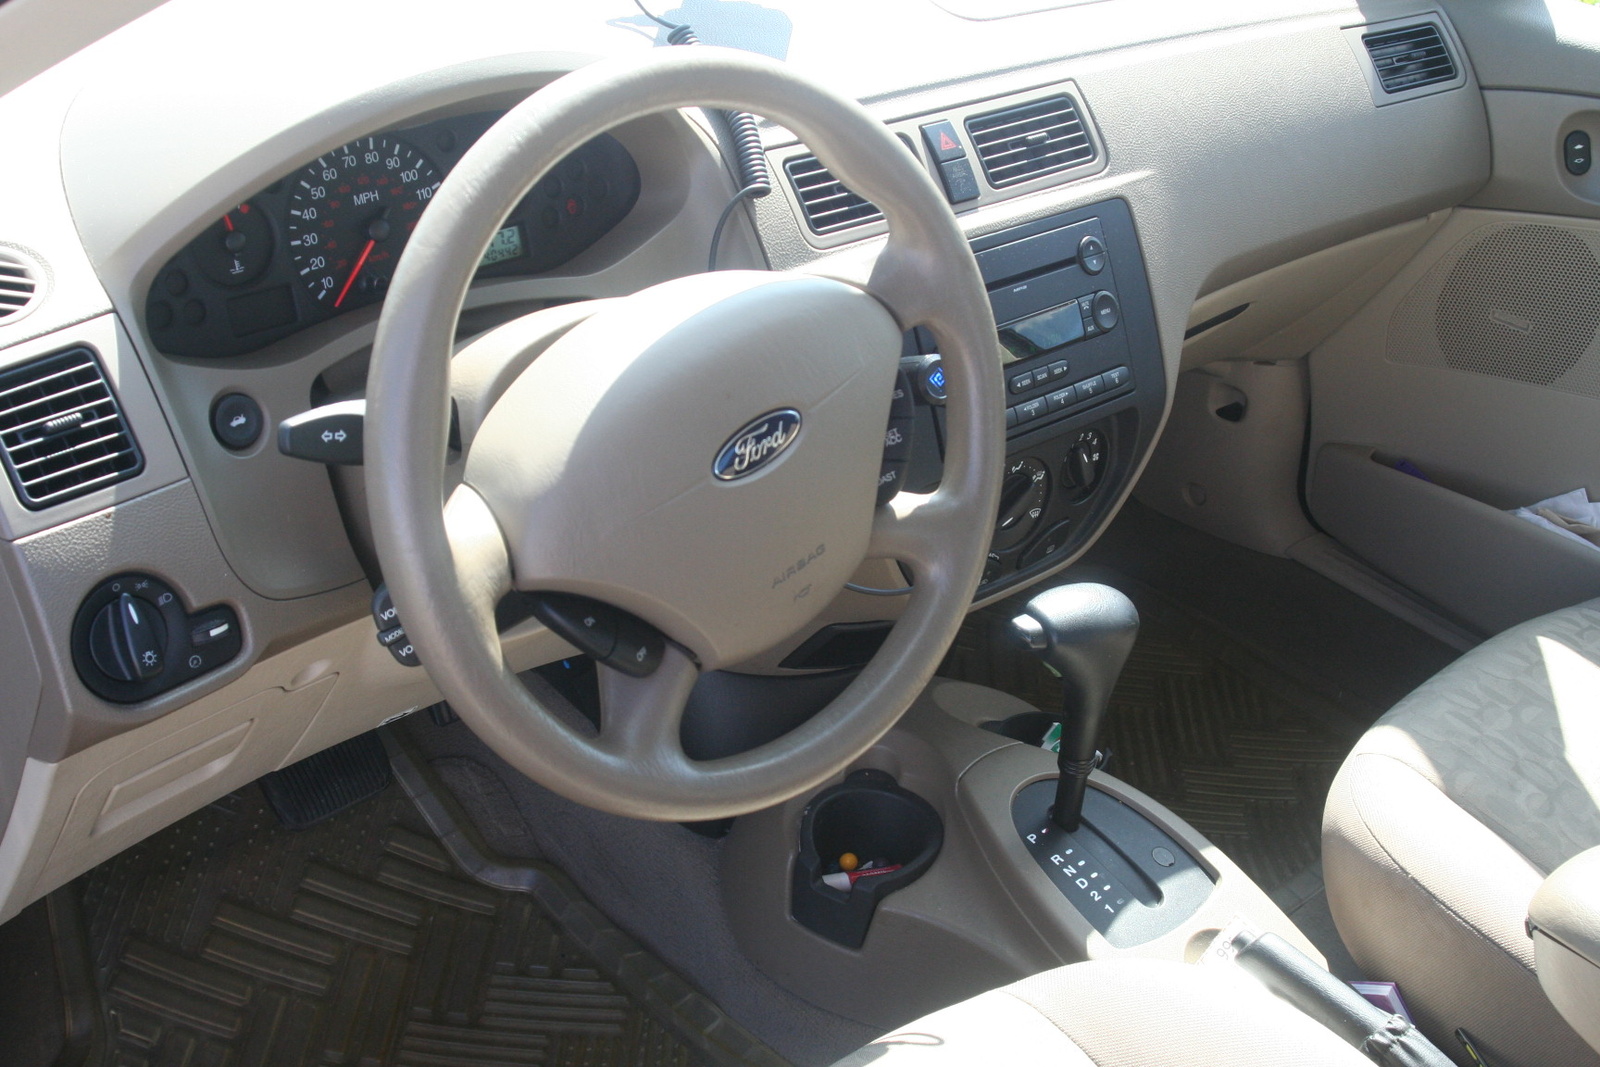 Ford Focus ZX4 SE